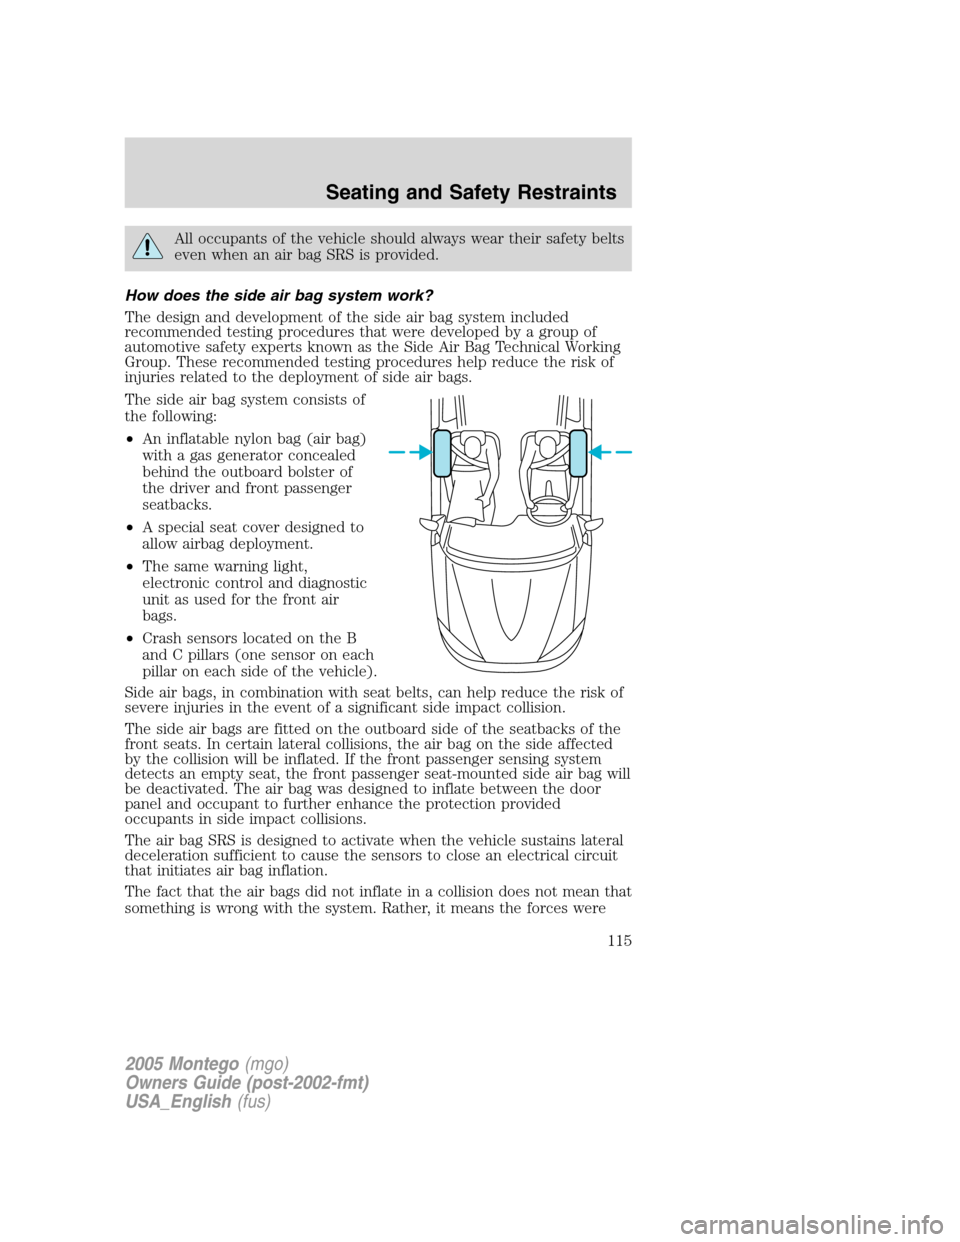 Mercury Montego 2005  Owners Manuals All occupants of the vehicle should always wear their safety belts
even when an air bag SRS is provided.
How does the side air bag system work?
The design and development of the side air bag system in